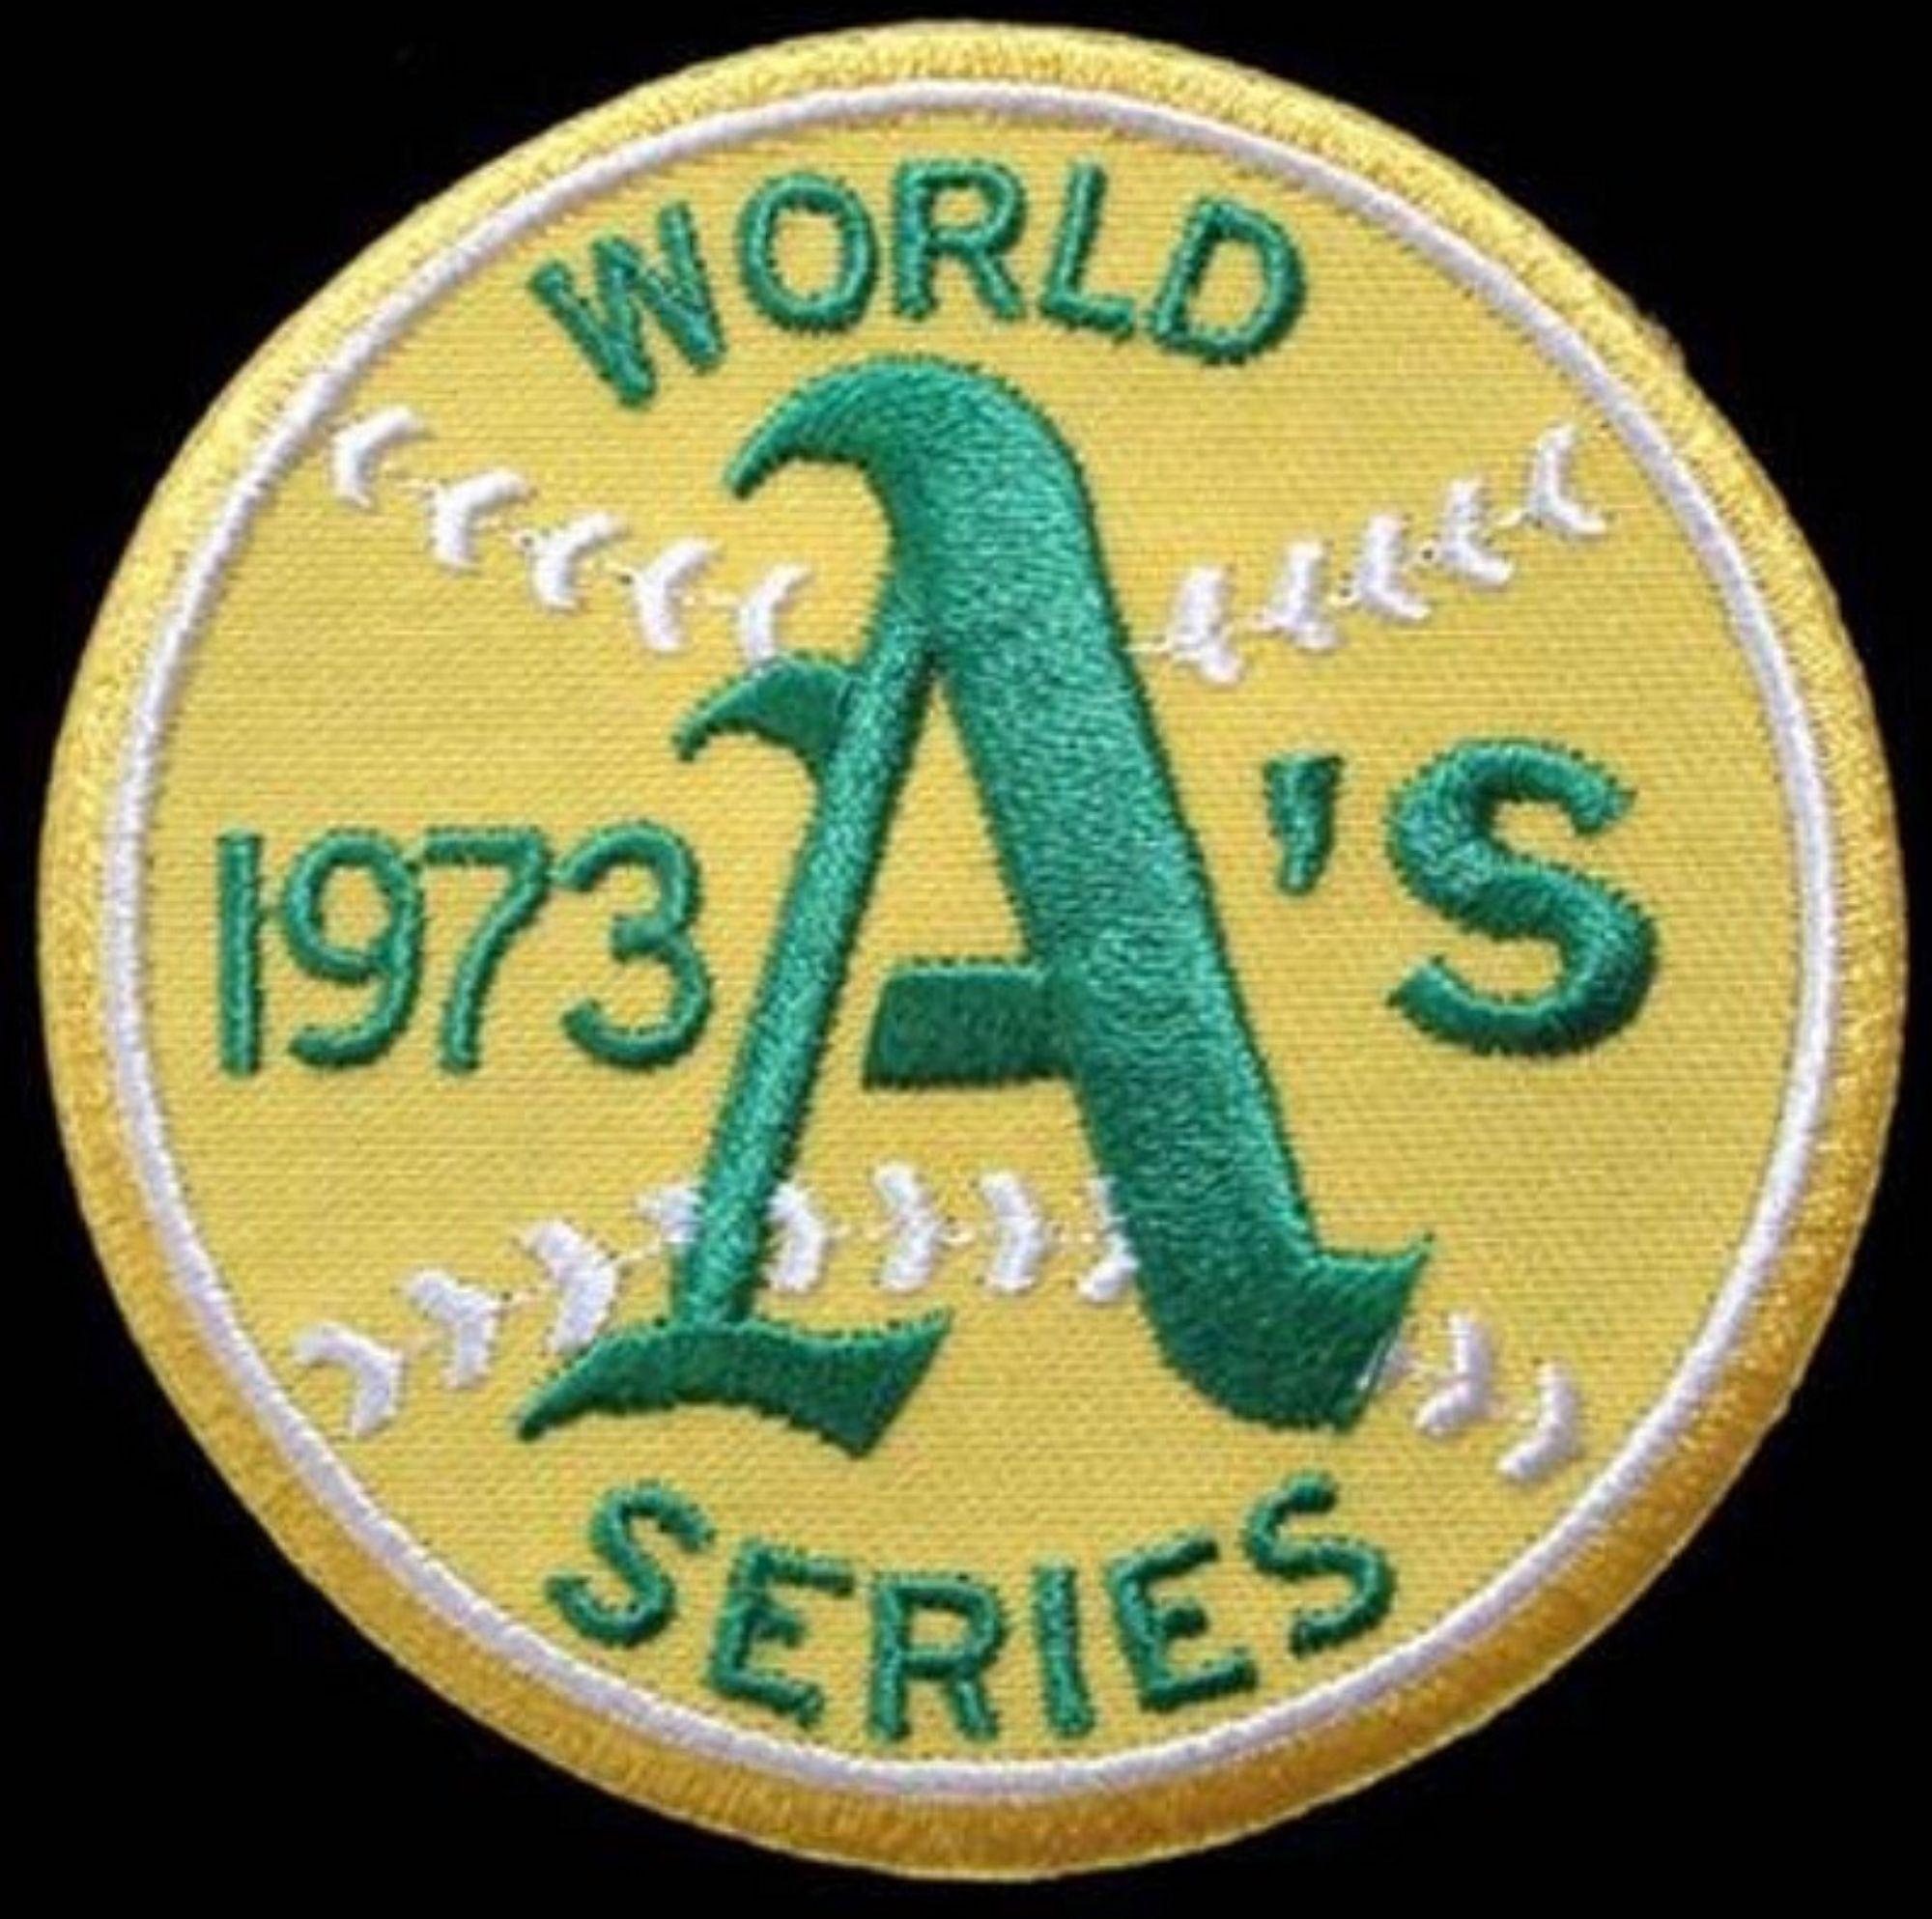 Oakland Athletics 1973 World Series Patch. LET'S GO